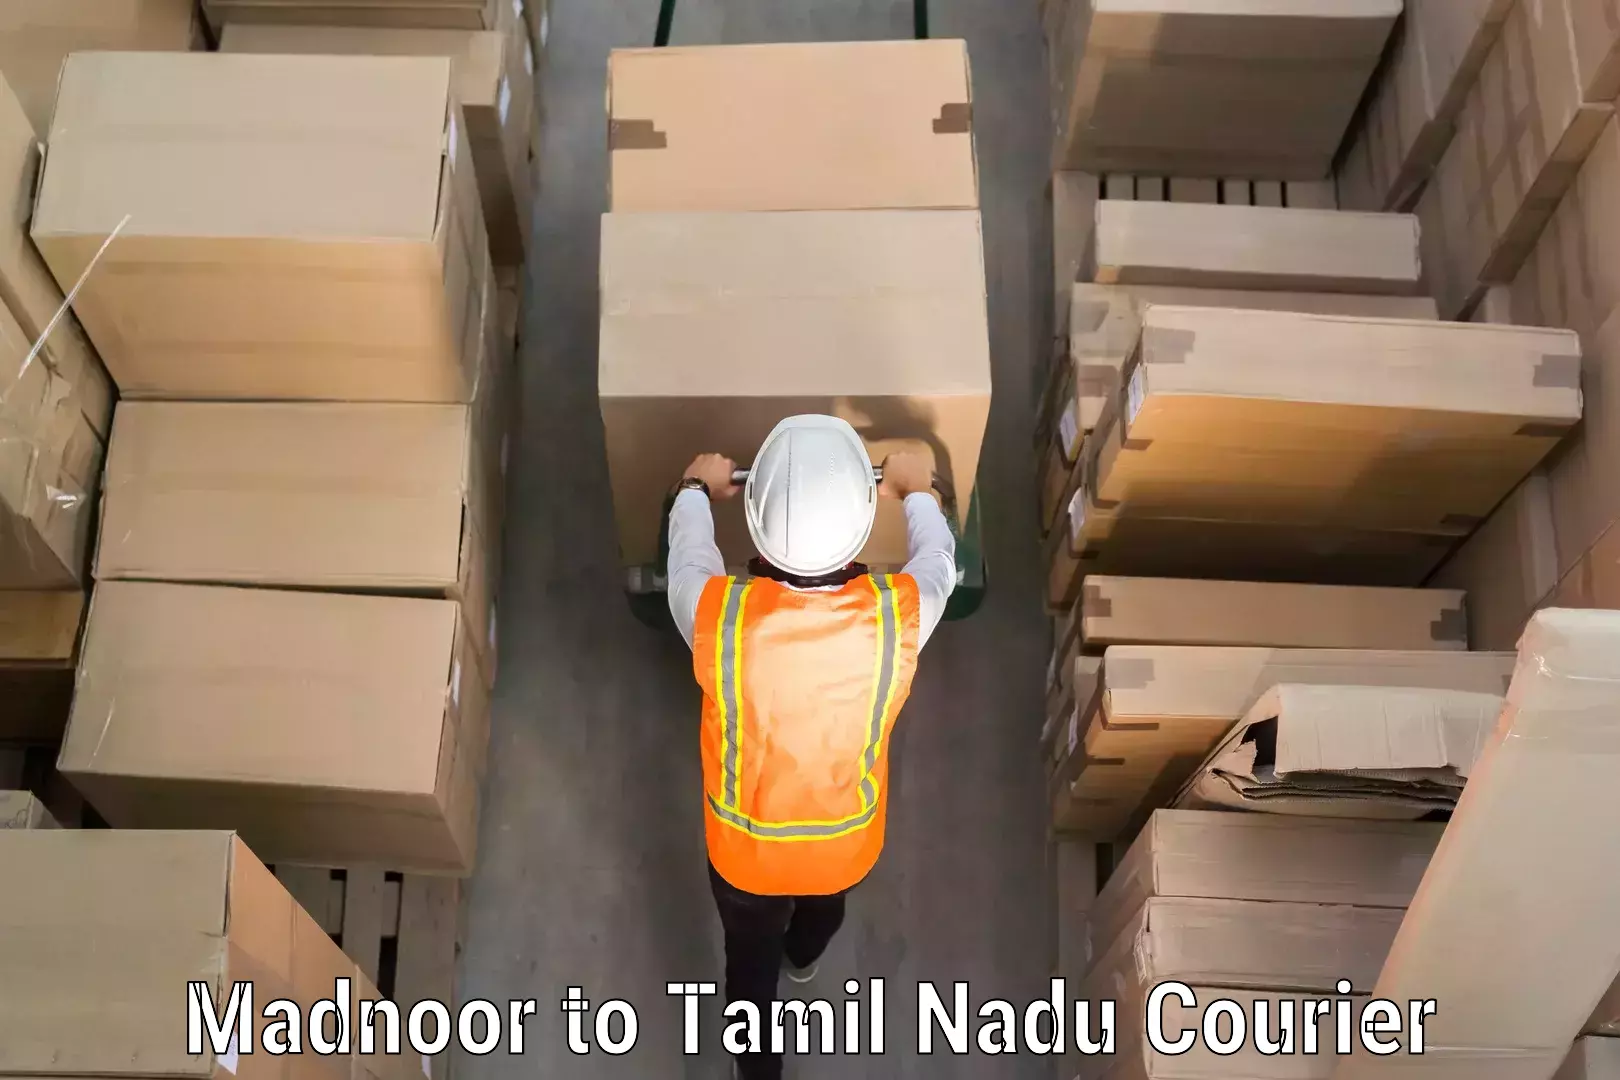 Luggage transport solutions Madnoor to Tuticorin Port